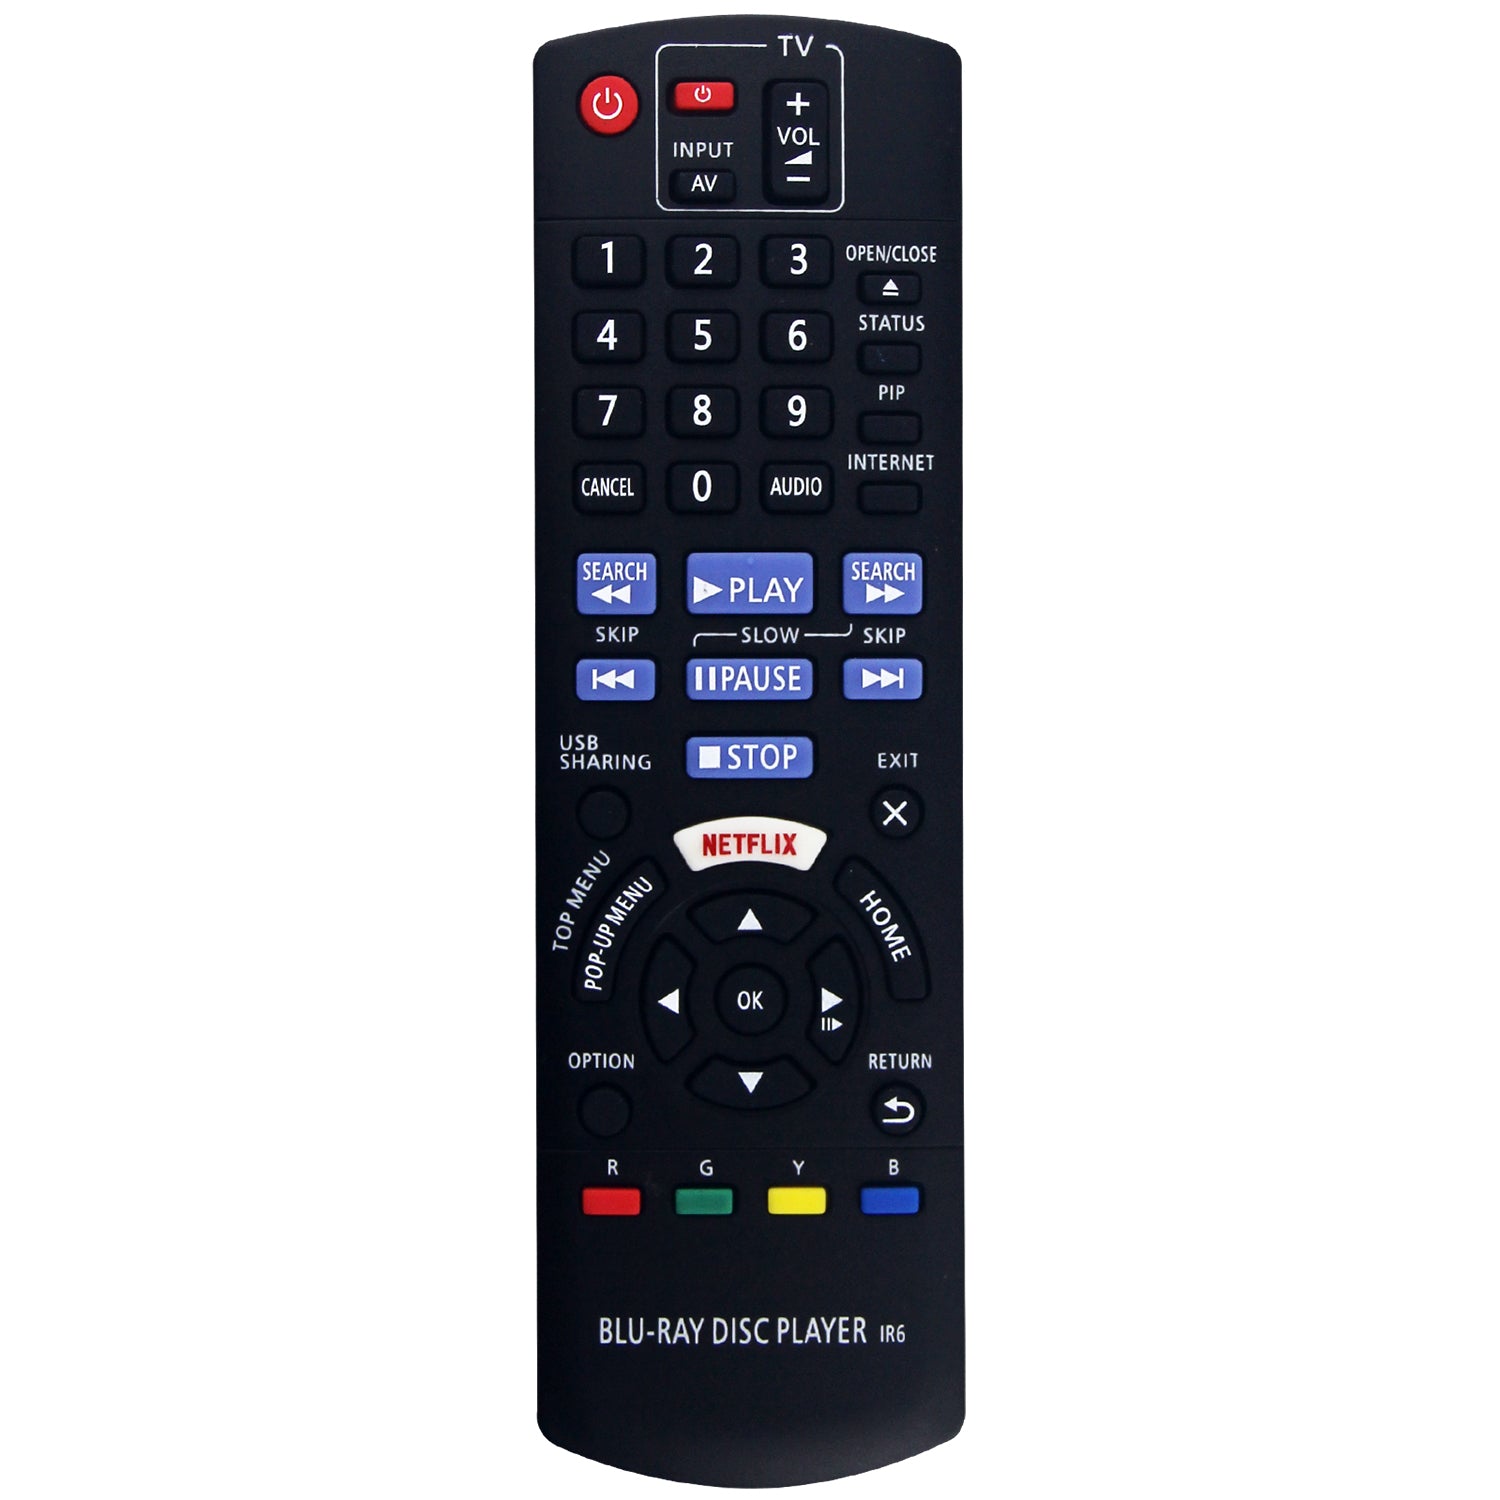 N2QAYB001026 Remote Control Replacement for Panasonic Blu-ray Disc player